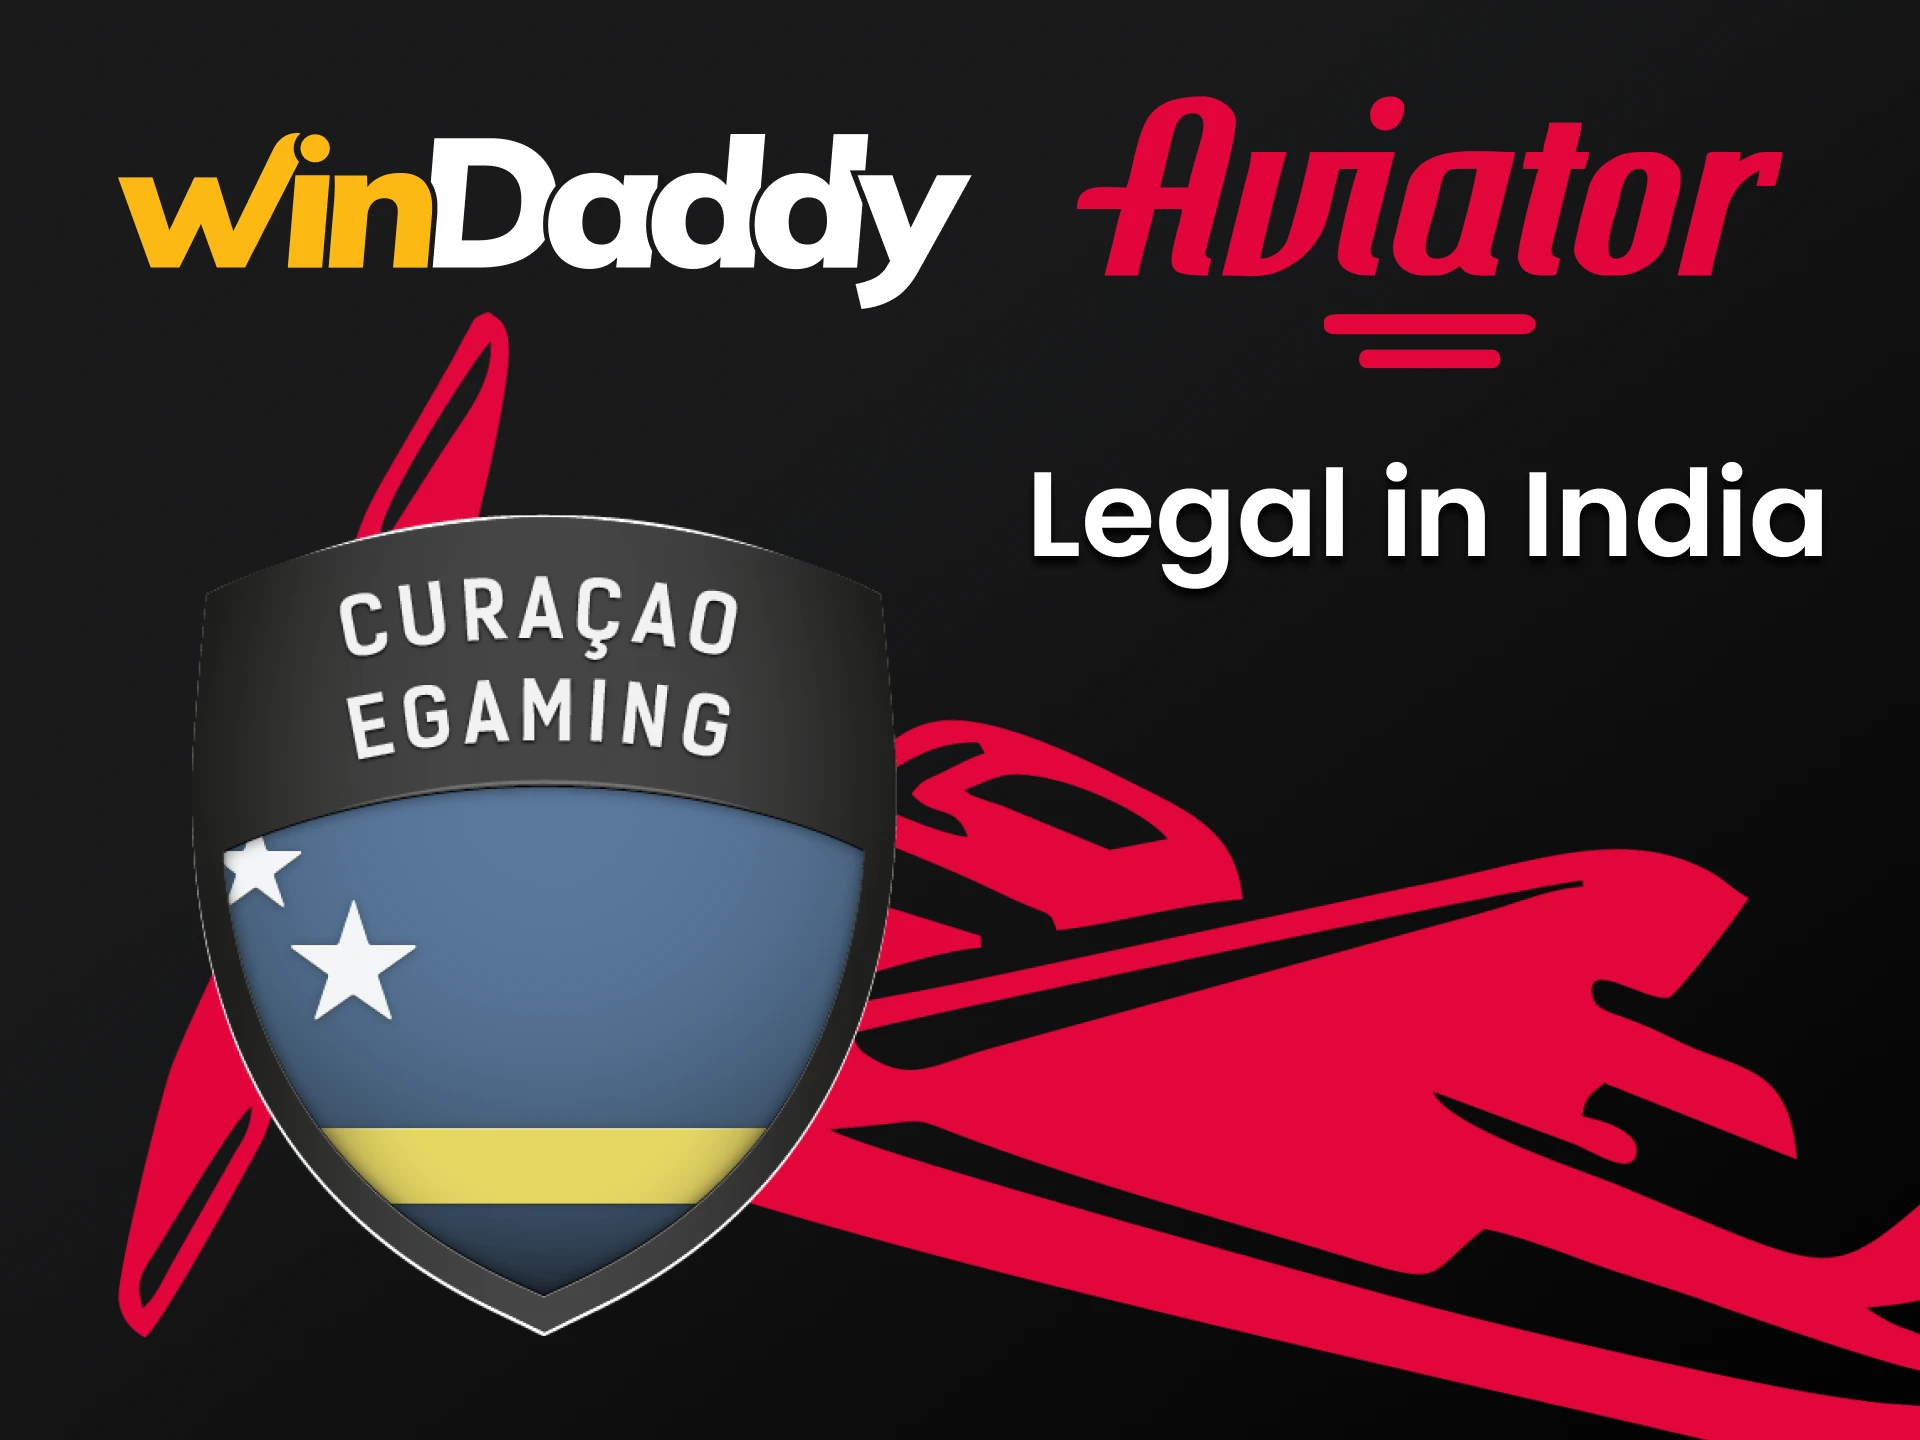 WinDaddy is legal to play Aviator.